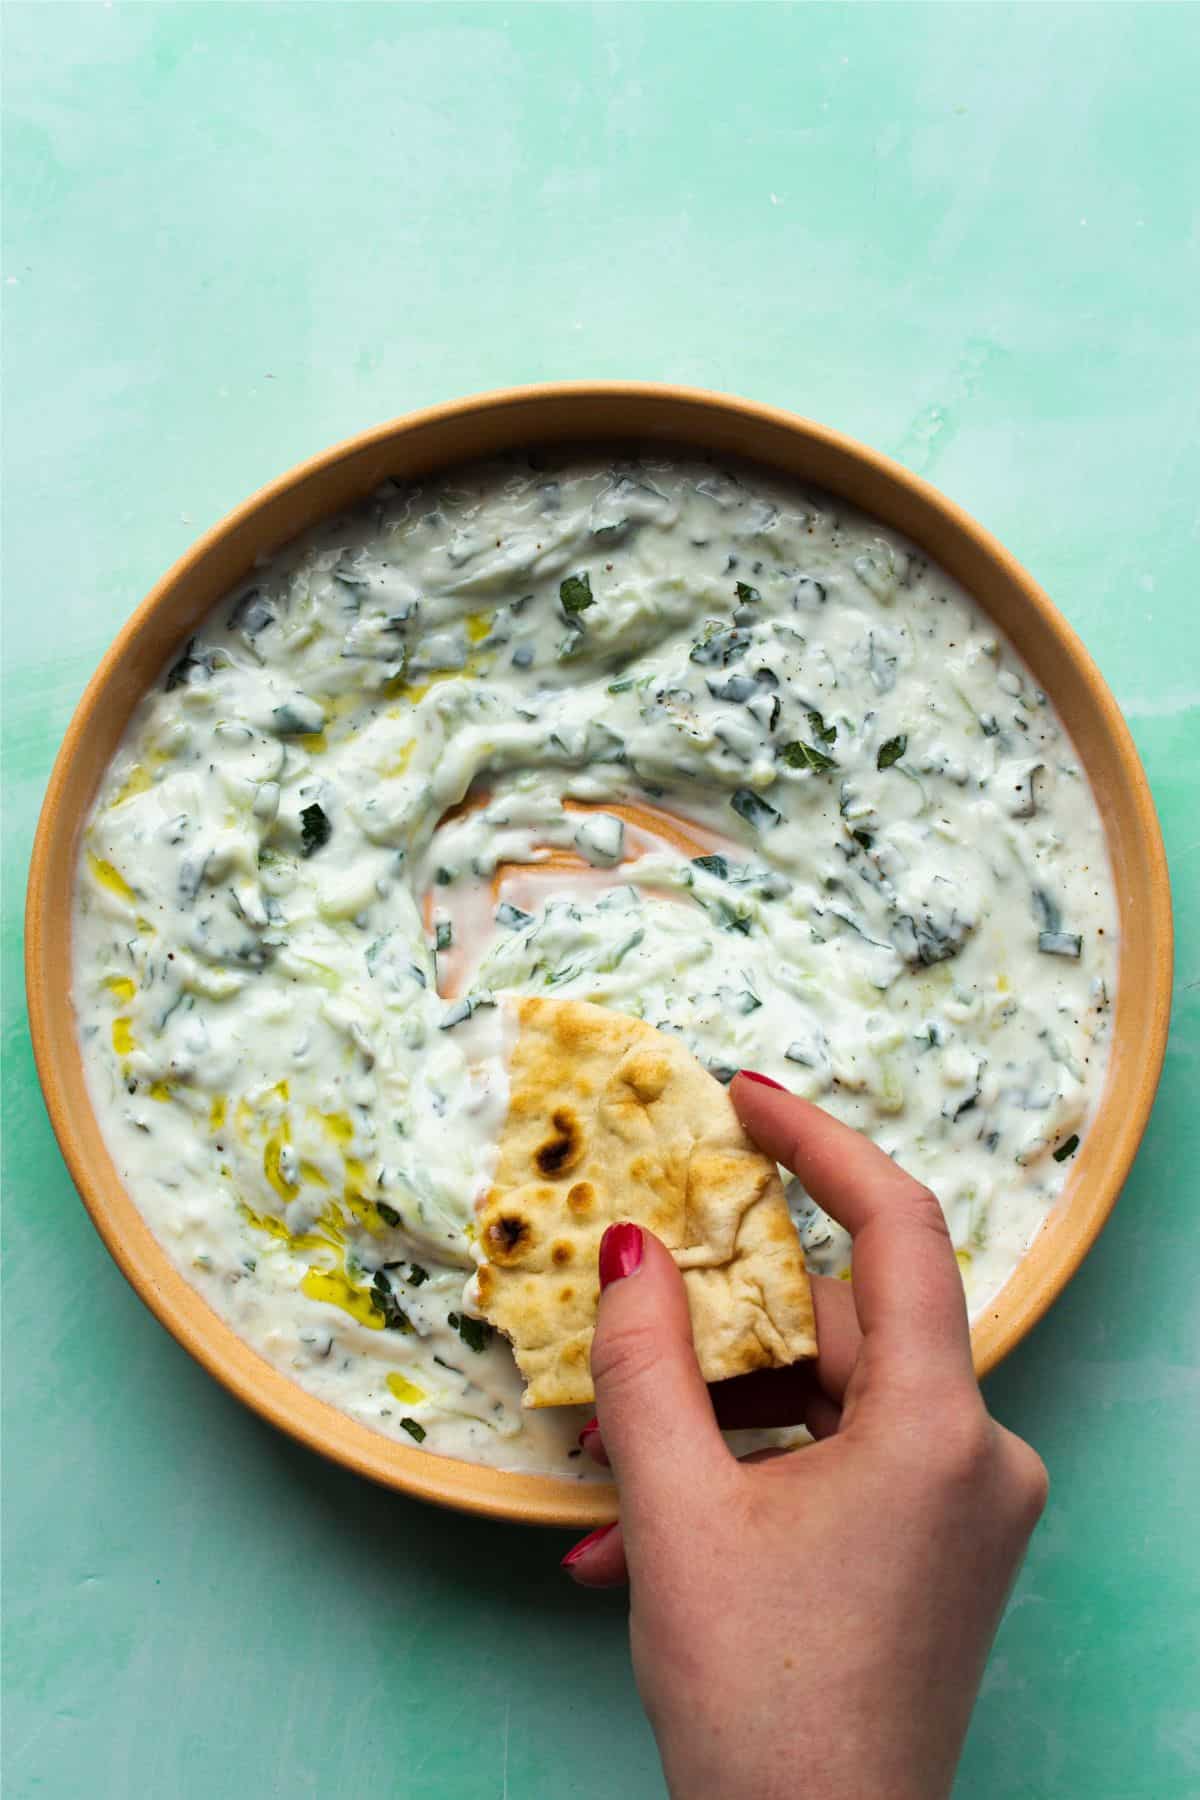 An overhead vew of a bowl of Tztziki topped with oil being dipped with part of naan bread held with hand.